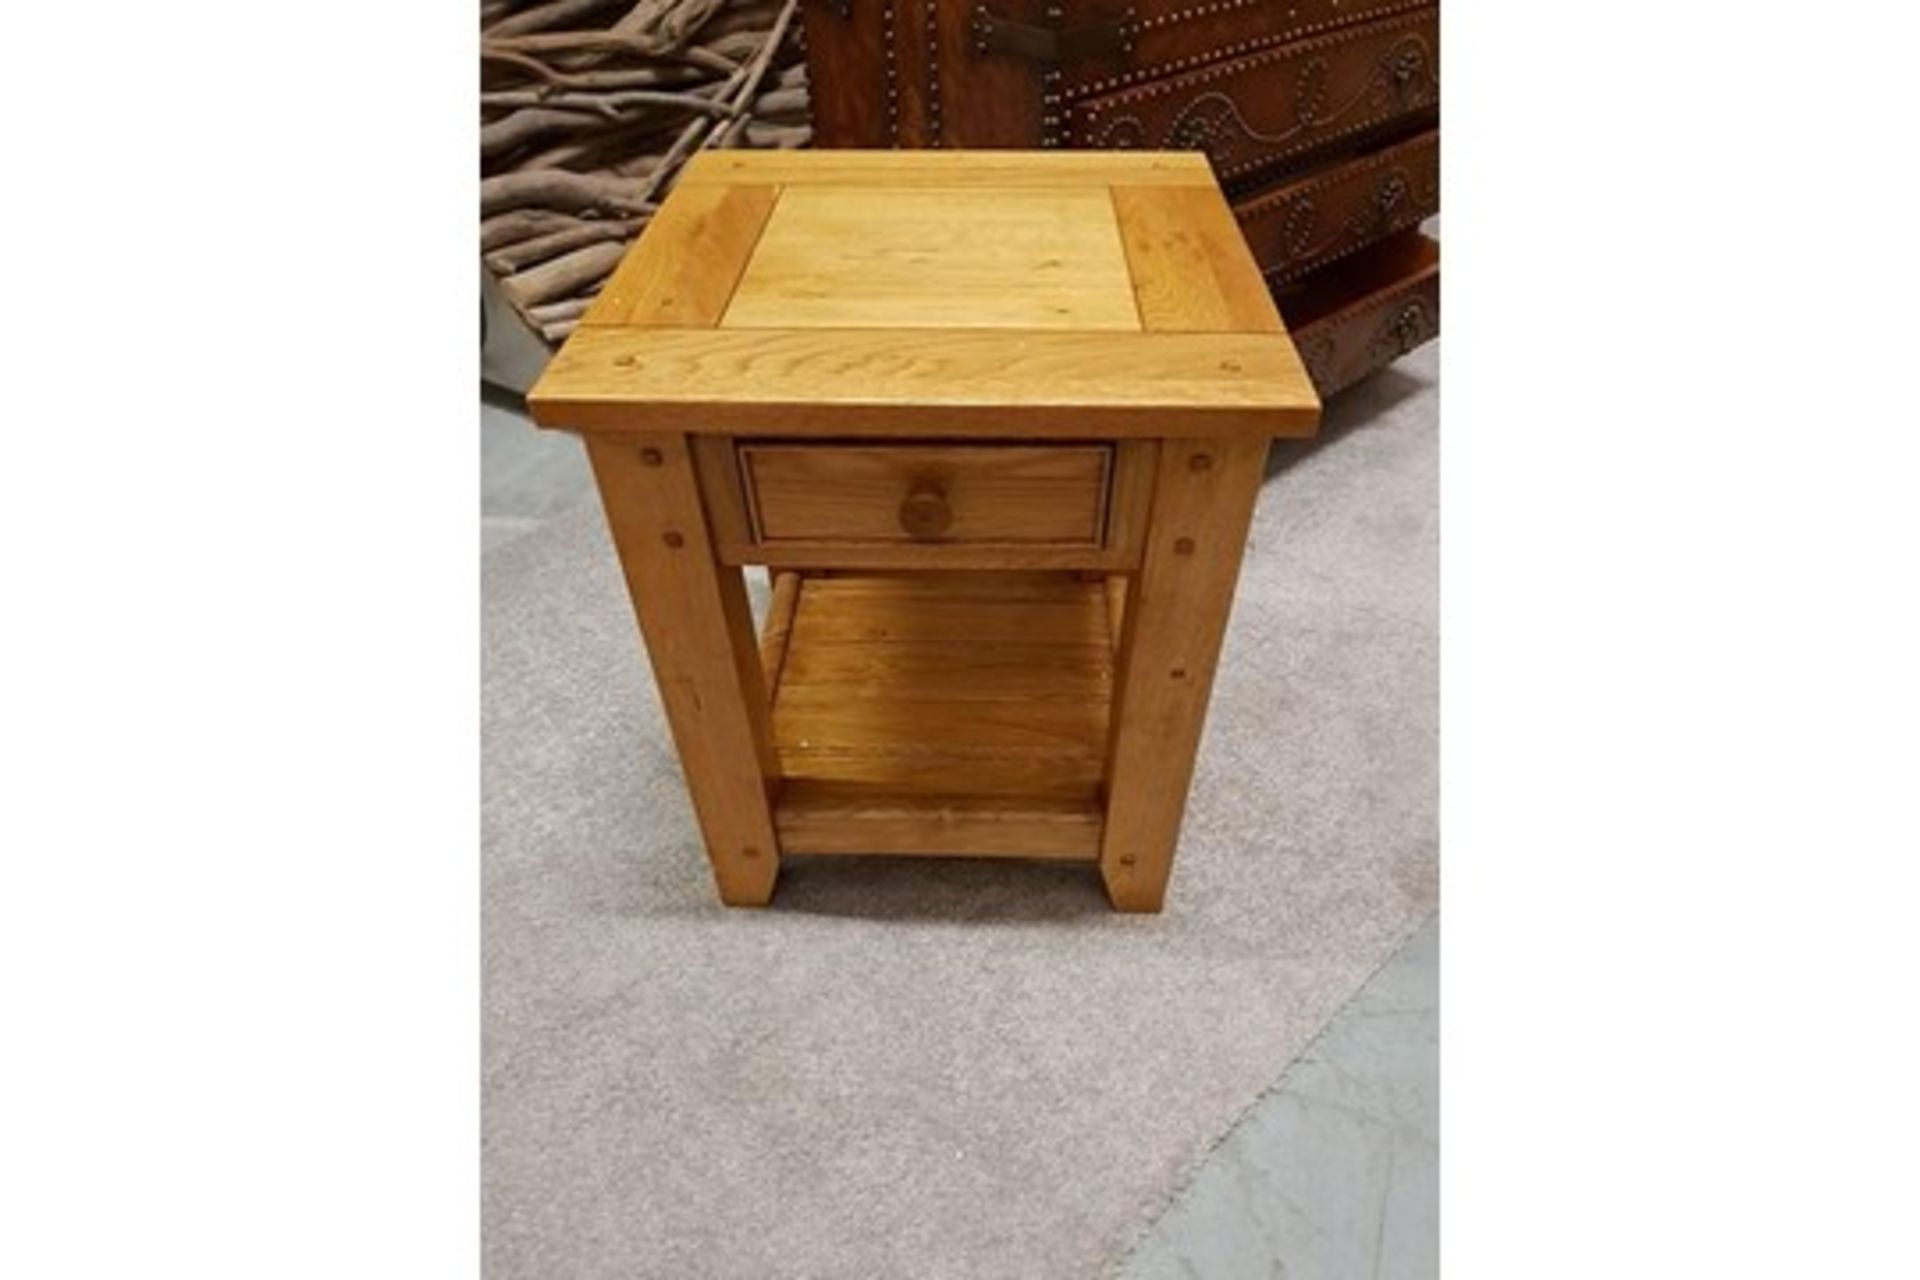 Table Wentworth Side Table Crafted Using Hand Selected Solid Oak Wood And Hand Distressed During